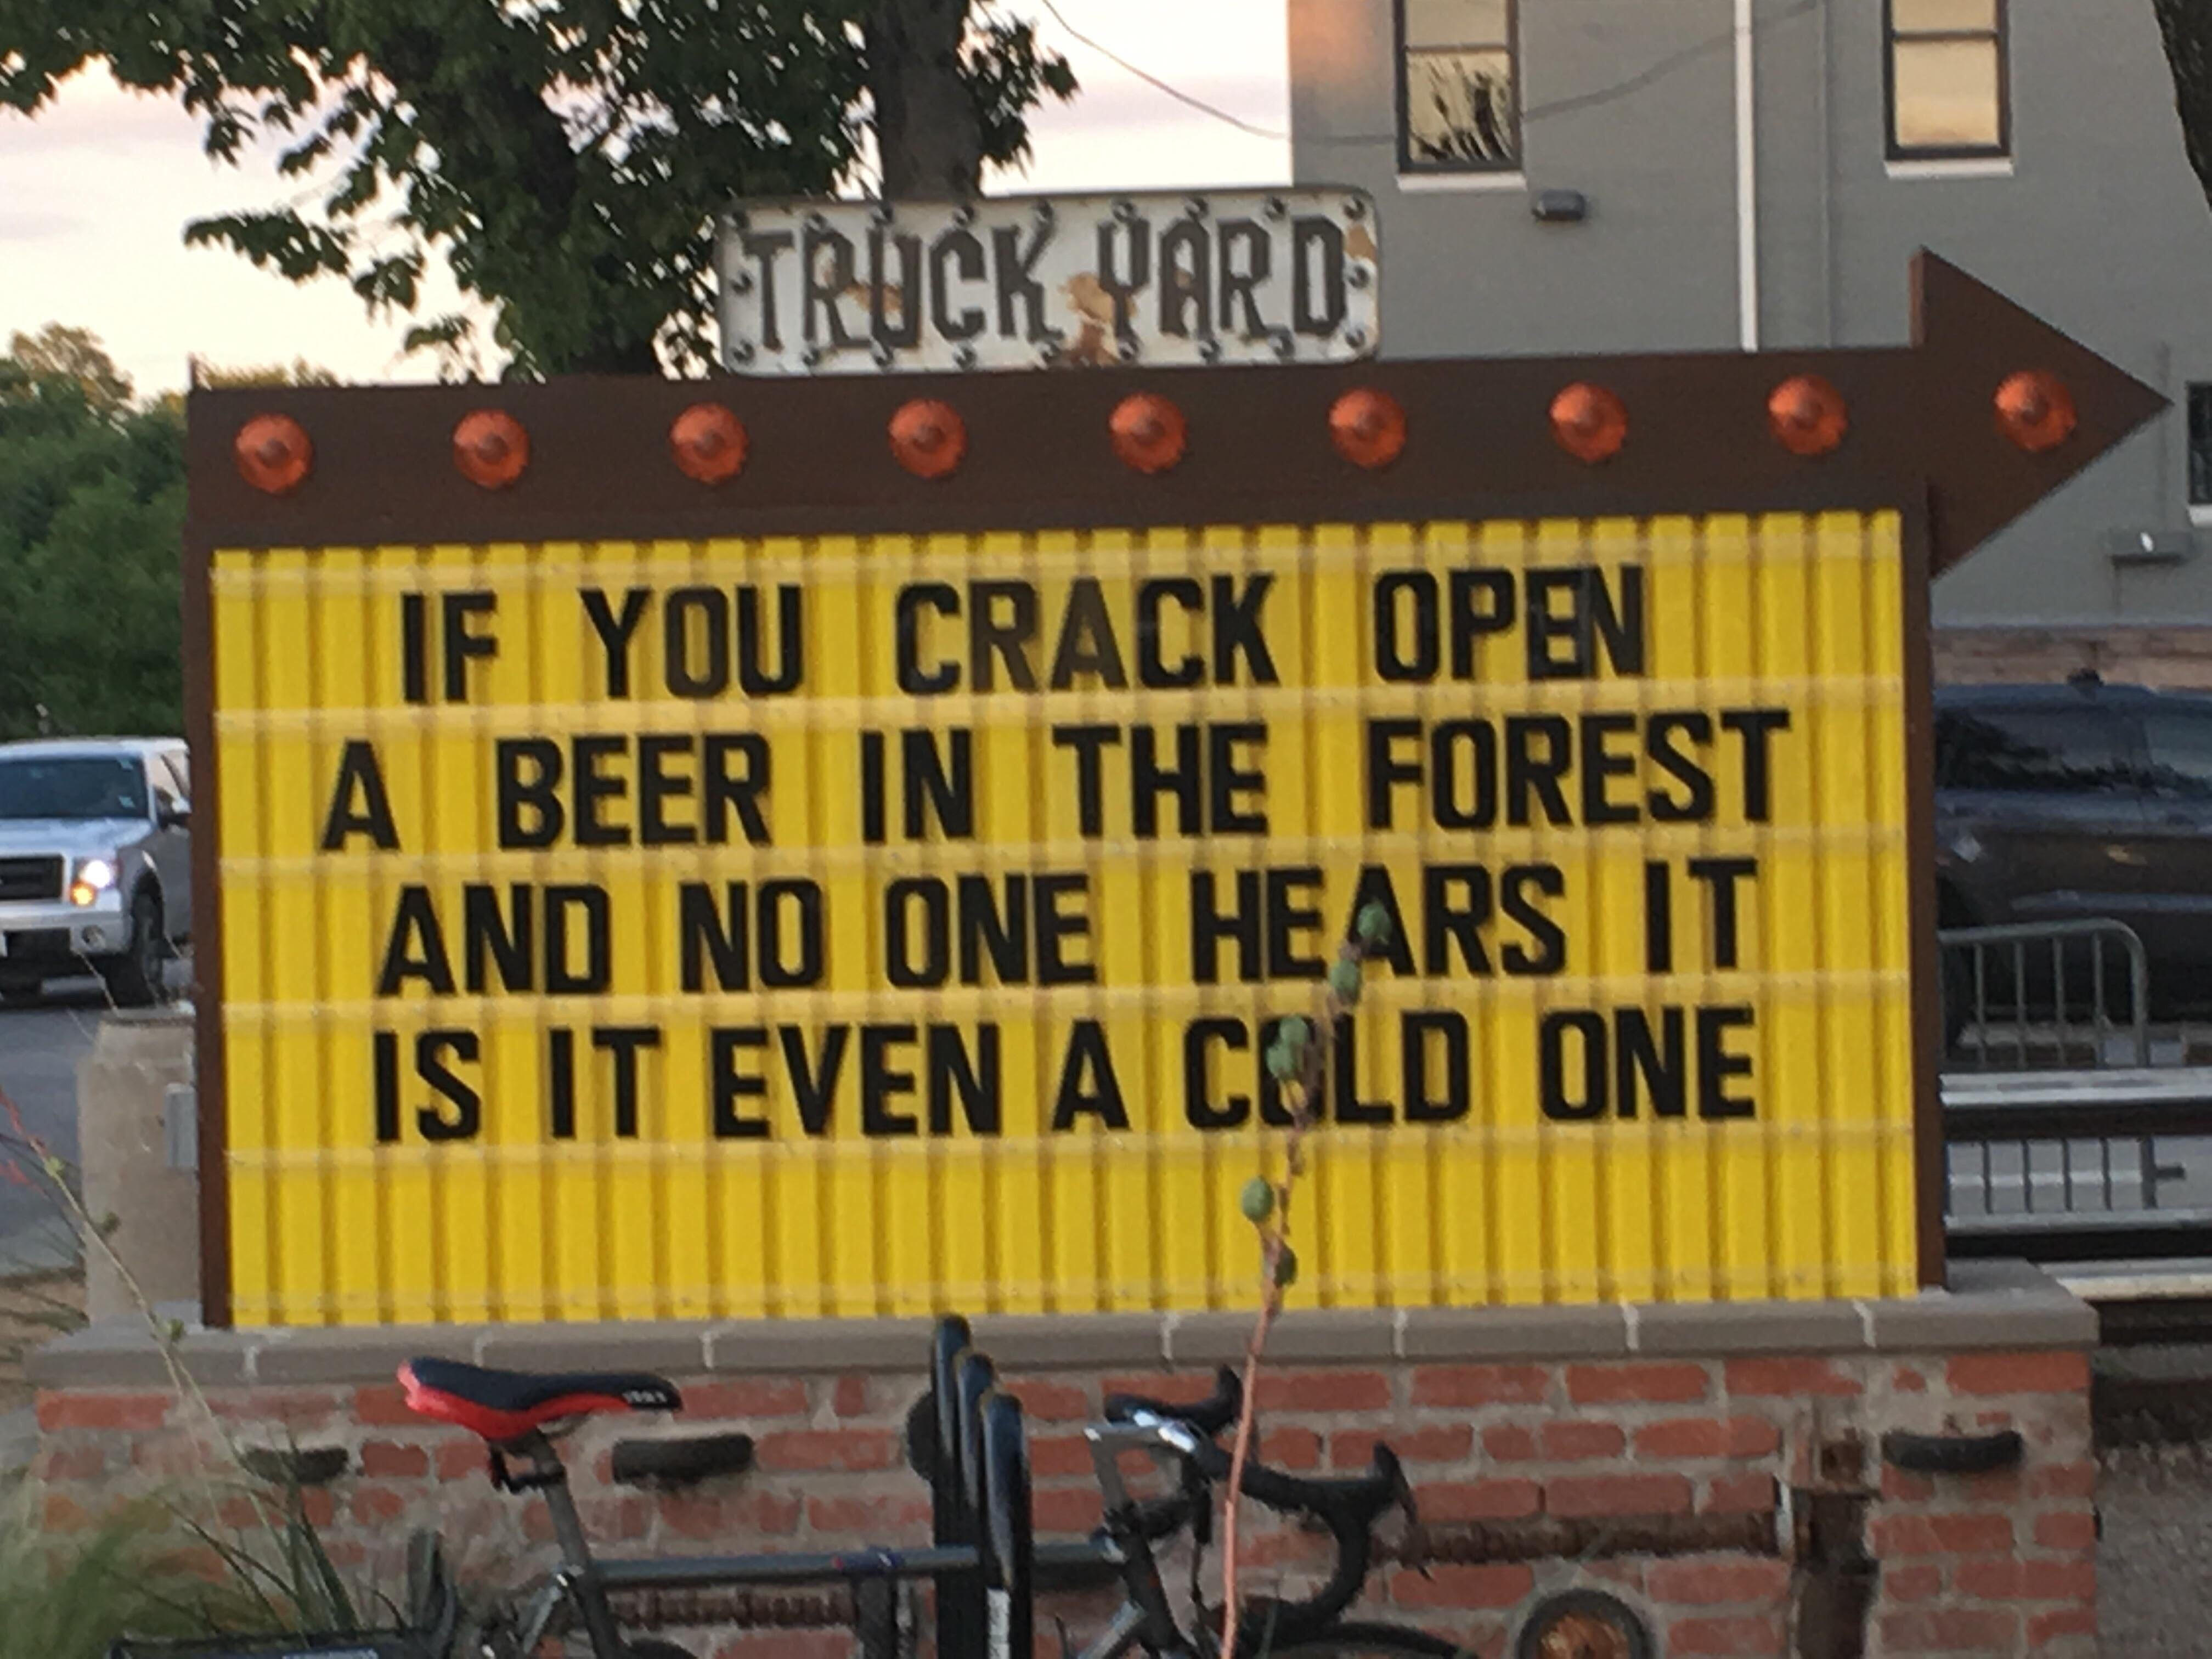 Funny sign asking if you crack open a beer in the forest and no one hears it is it even a cold one?